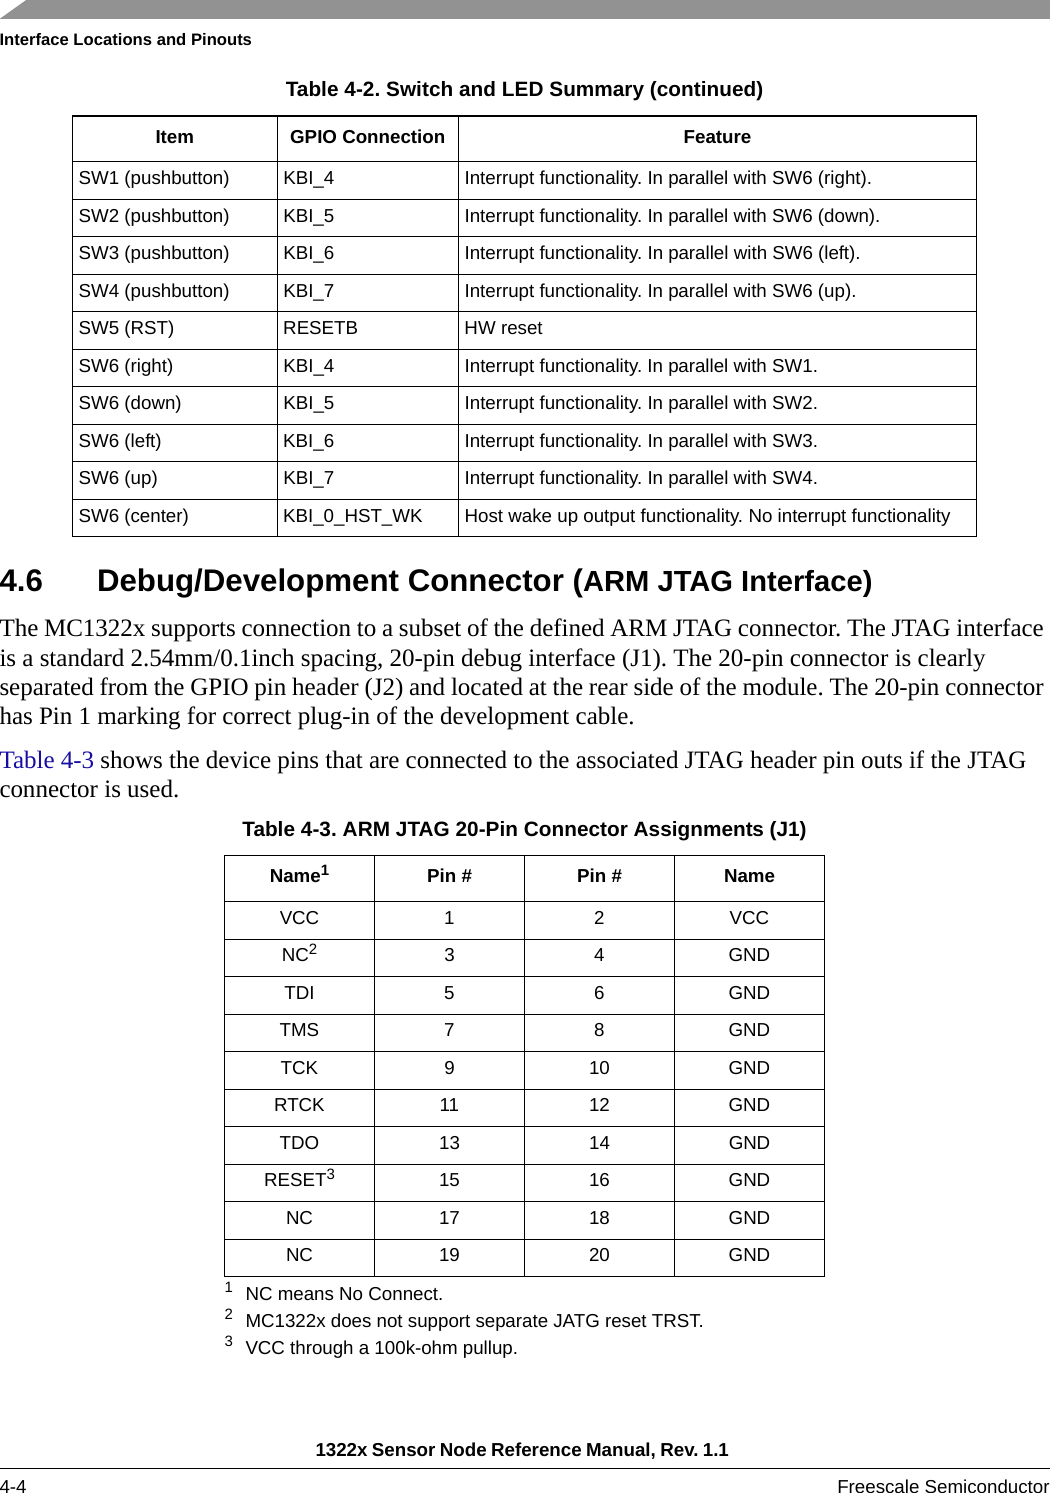 Interface Locations and Pinouts1322x Sensor Node Reference Manual, Rev. 1.1 4-4 Freescale Semiconductor4.6 Debug/Development Connector (ARM JTAG Interface)The MC1322x supports connection to a subset of the defined ARM JTAG connector. The JTAG interface is a standard 2.54mm/0.1inch spacing, 20-pin debug interface (J1). The 20-pin connector is clearly separated from the GPIO pin header (J2) and located at the rear side of the module. The 20-pin connector has Pin 1 marking for correct plug-in of the development cable. Table 4-3 shows the device pins that are connected to the associated JTAG header pin outs if the JTAG connector is used.SW1 (pushbutton) KBI_4 Interrupt functionality. In parallel with SW6 (right).SW2 (pushbutton) KBI_5 Interrupt functionality. In parallel with SW6 (down).SW3 (pushbutton) KBI_6 Interrupt functionality. In parallel with SW6 (left).SW4 (pushbutton) KBI_7 Interrupt functionality. In parallel with SW6 (up).SW5 (RST) RESETB HW resetSW6 (right) KBI_4 Interrupt functionality. In parallel with SW1.SW6 (down) KBI_5 Interrupt functionality. In parallel with SW2.SW6 (left) KBI_6 Interrupt functionality. In parallel with SW3.SW6 (up) KBI_7 Interrupt functionality. In parallel with SW4.SW6 (center) KBI_0_HST_WK Host wake up output functionality. No interrupt functionalityTable 4-3. ARM JTAG 20-Pin Connector Assignments (J1)Name11NC means No Connect.Pin # Pin # NameVCC 1 2 VCCNC22MC1322x does not support separate JATG reset TRST.34GNDTDI 5 6 GNDTMS 7 8 GNDTCK 9 10 GNDRTCK 11 12 GNDTDO 13 14 GNDRESET33VCC through a 100k-ohm pullup.15 16 GNDNC 17 18 GNDNC 19 20 GNDTable 4-2. Switch and LED Summary (continued)Item GPIO Connection Feature